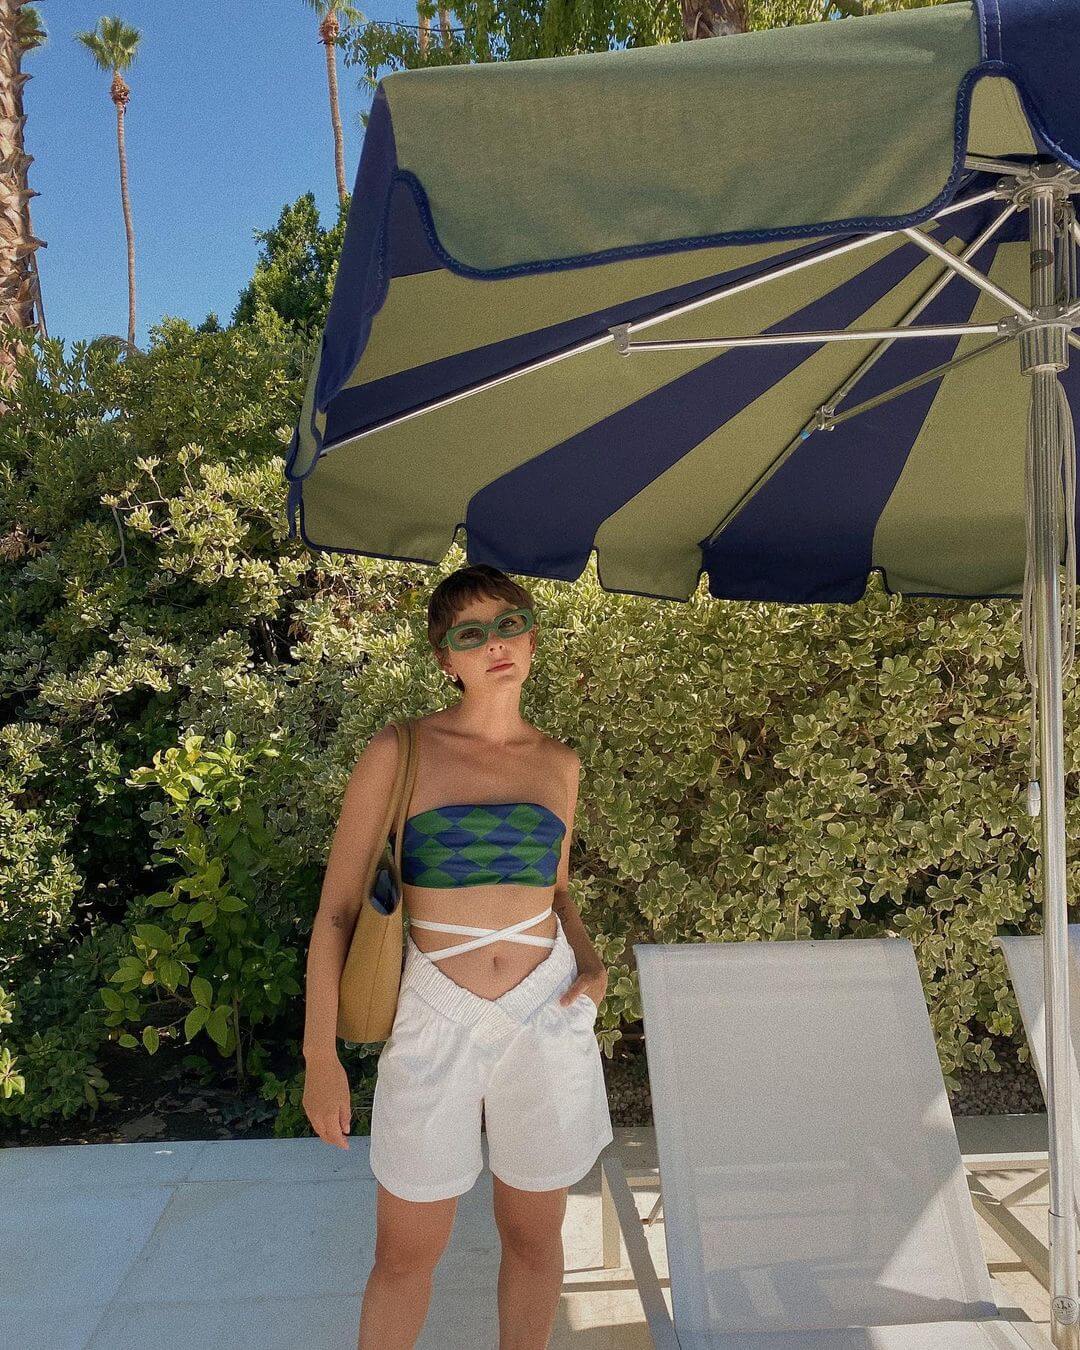 10 Chic Pool Party Outfits That Make An Entrance